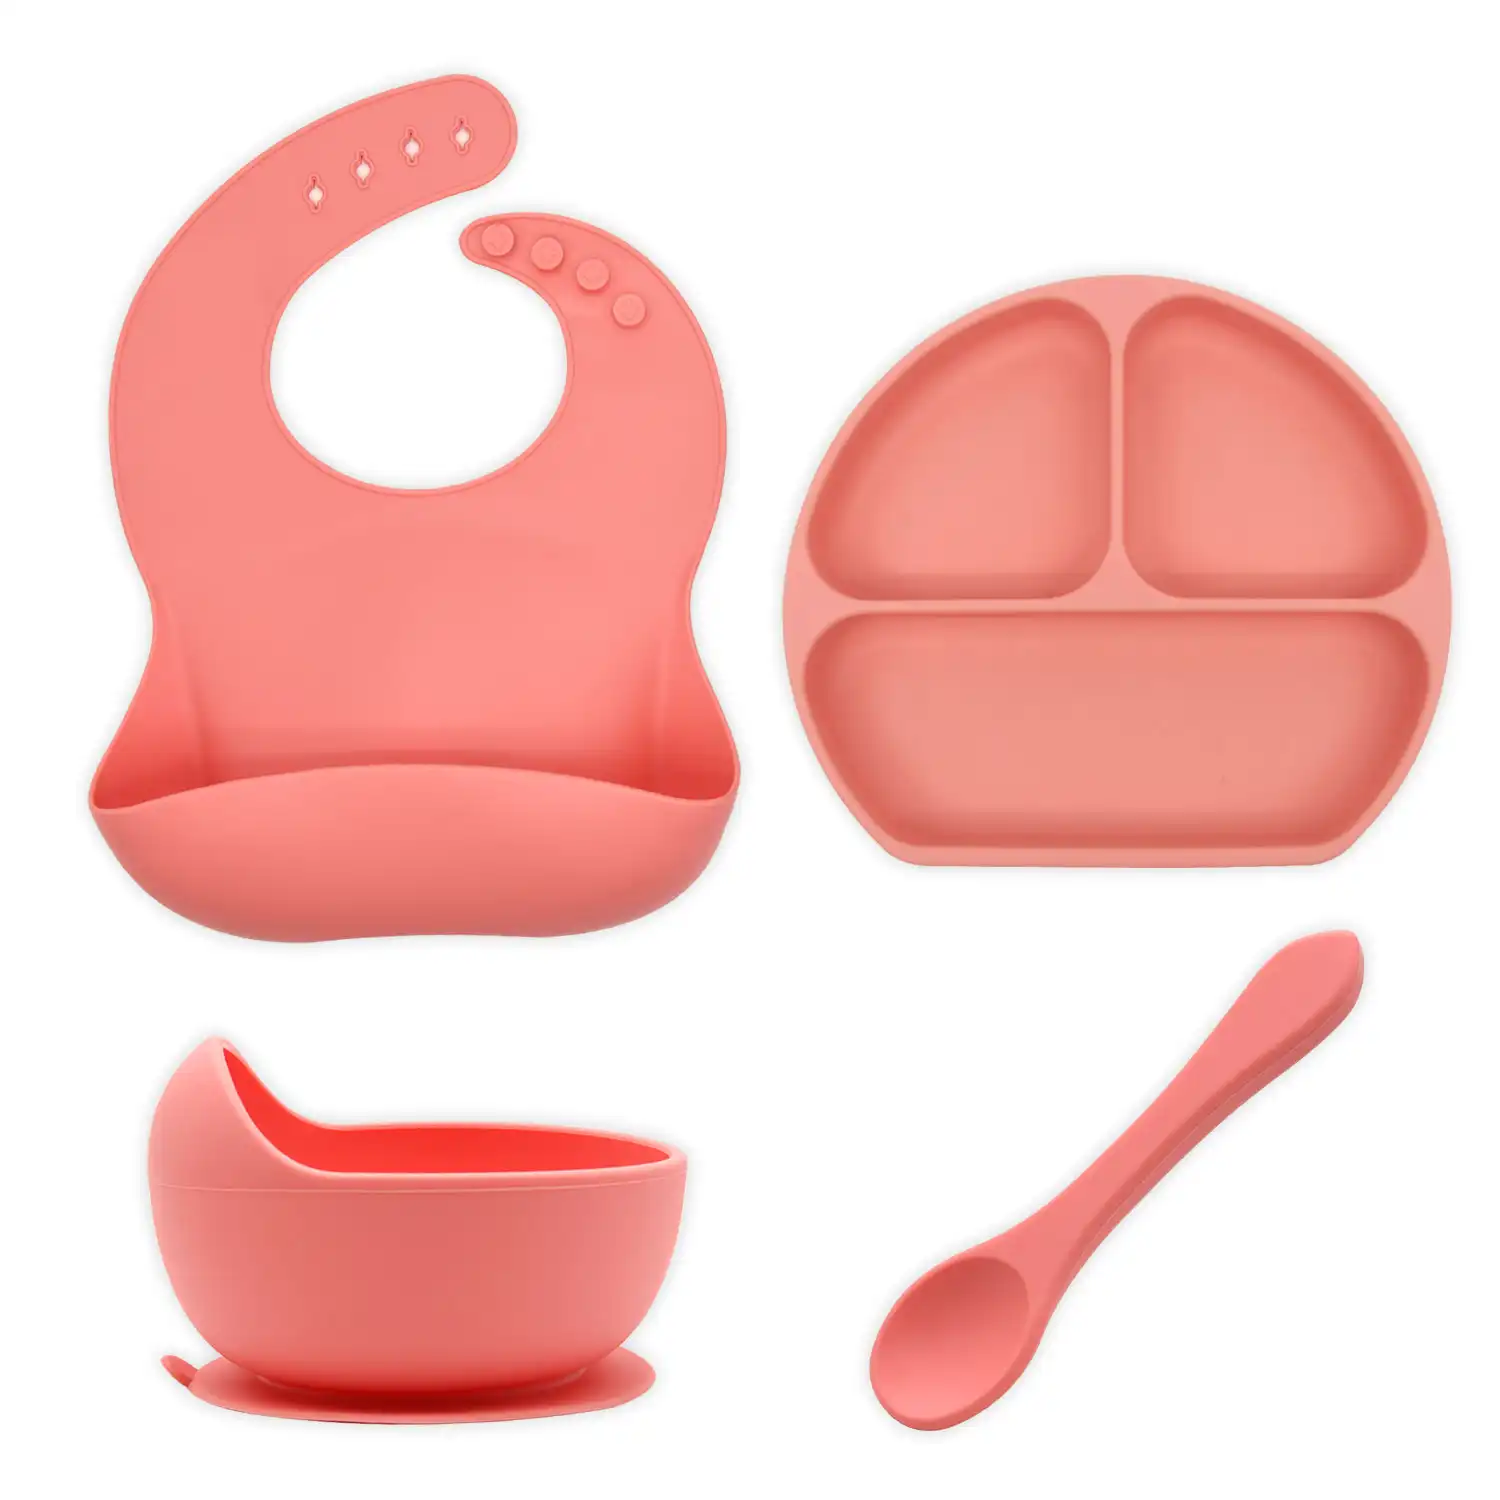 BPA Free Toddler Food Led Weaning Self Feeding Non Slip Grip Dinner Dish Set Divided Suction Silicone Baby Plate with Lid